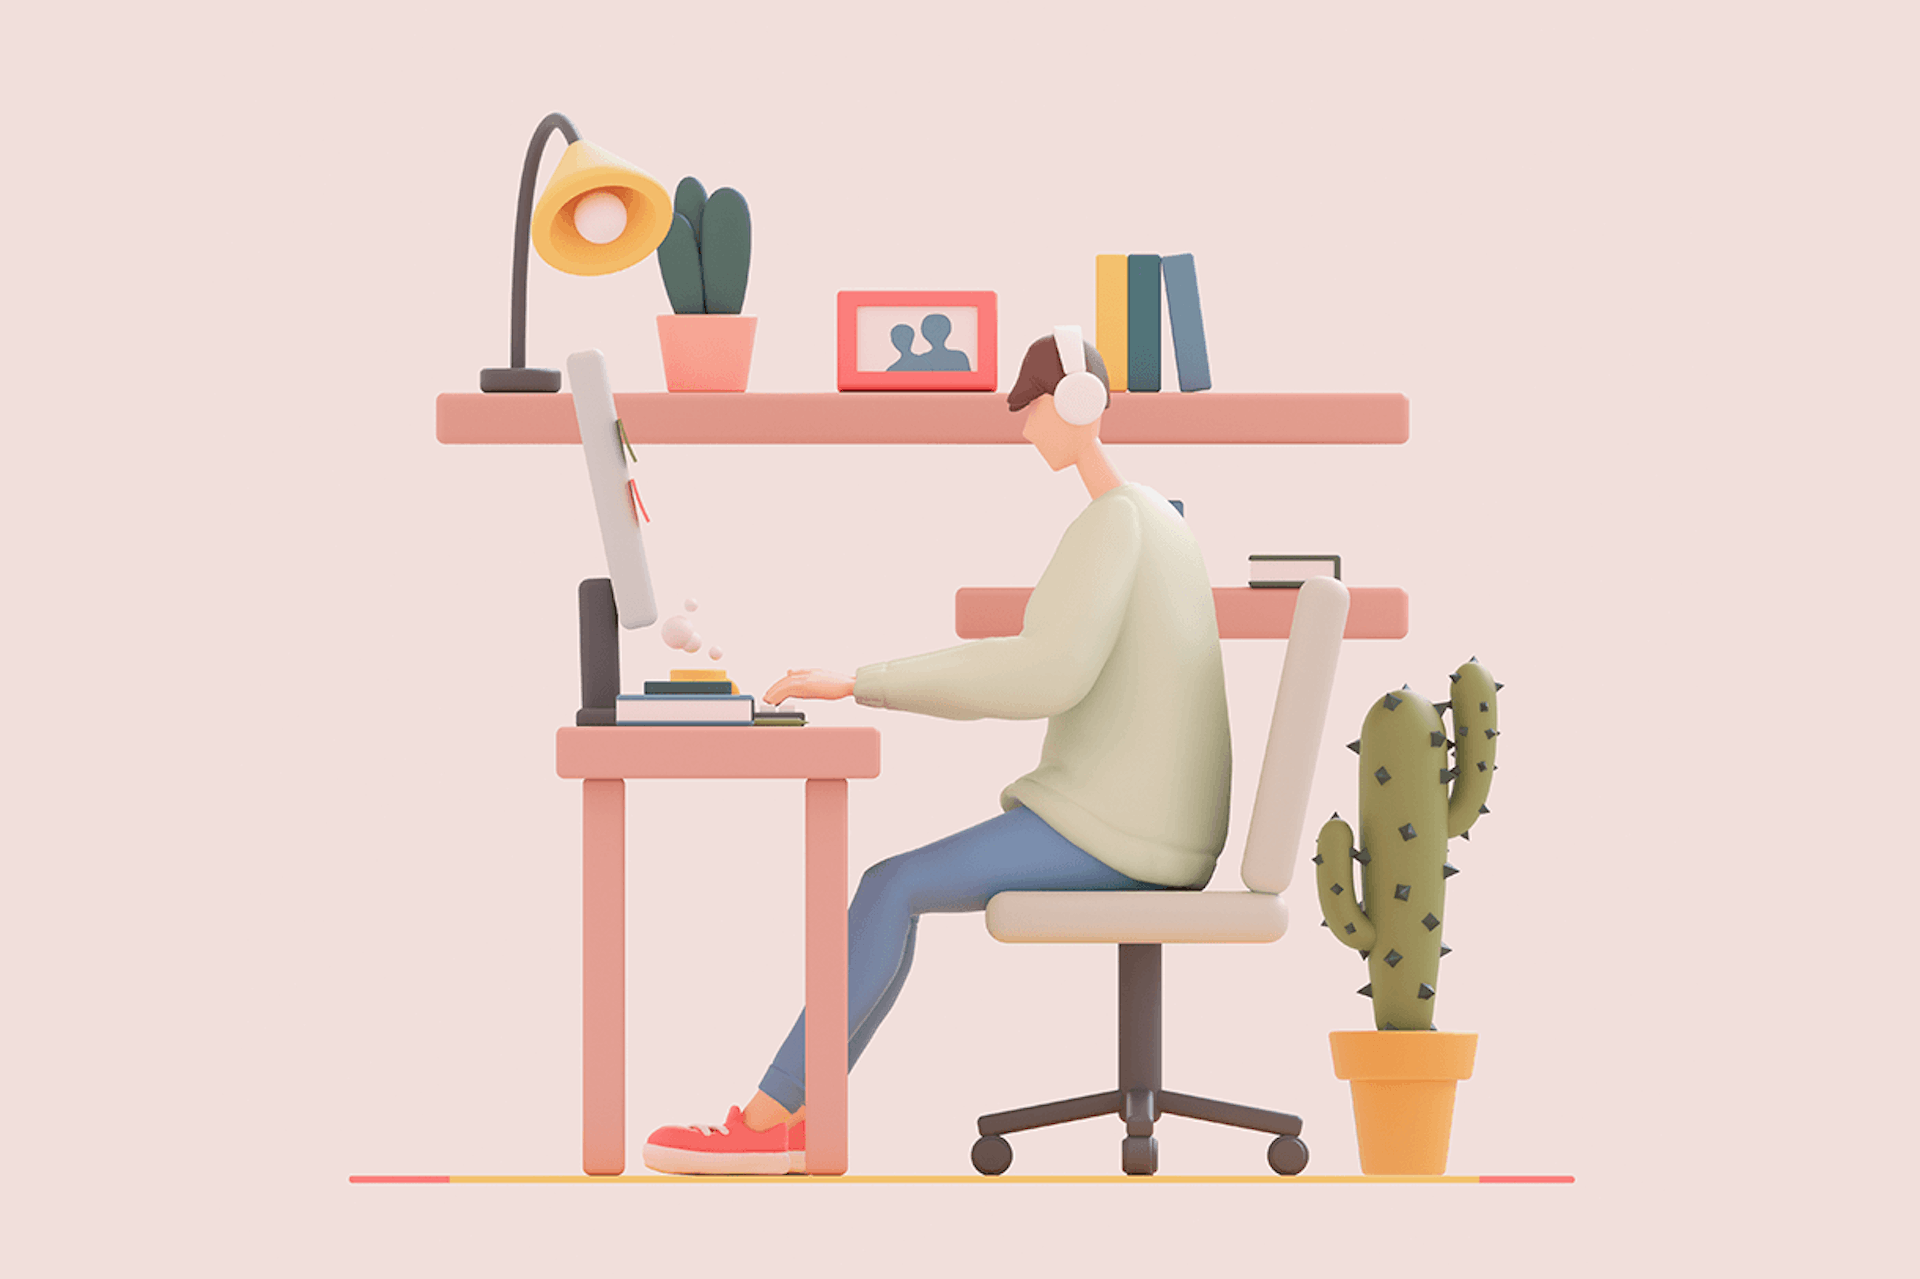 An illustration of a person at a desktop computer representing desk research.